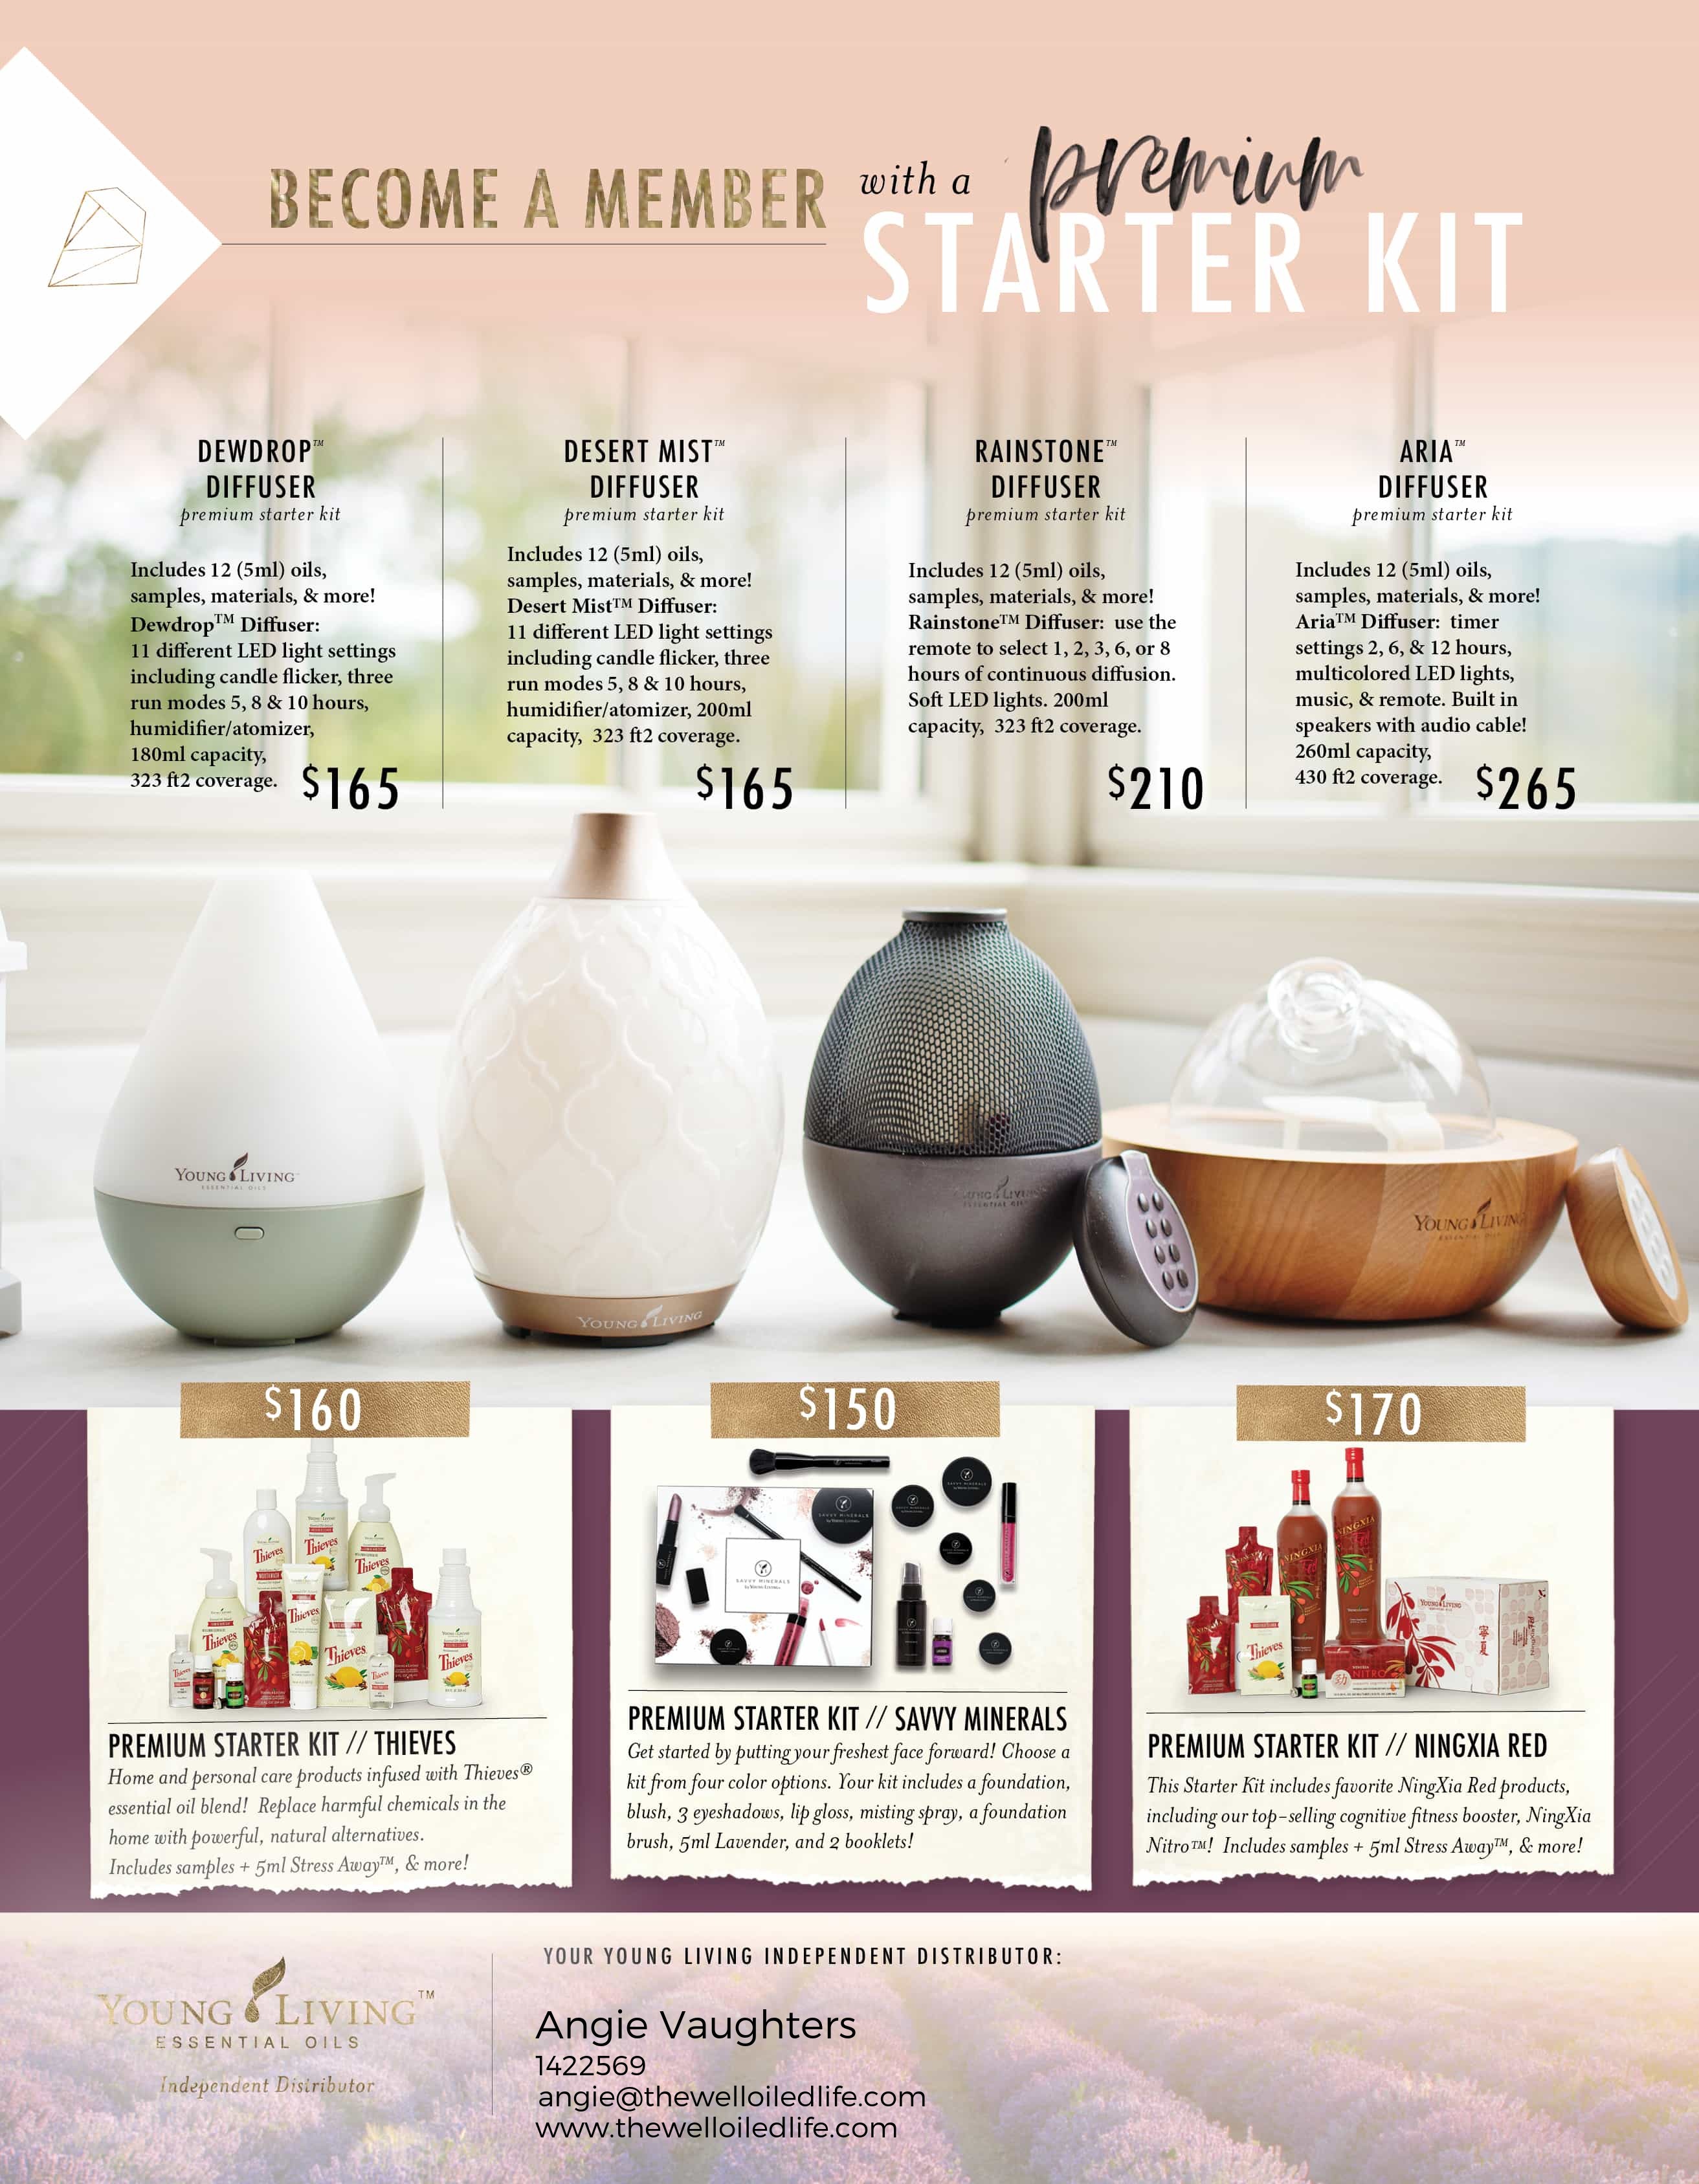 Young Living Premium Starter Kit Options and Prices